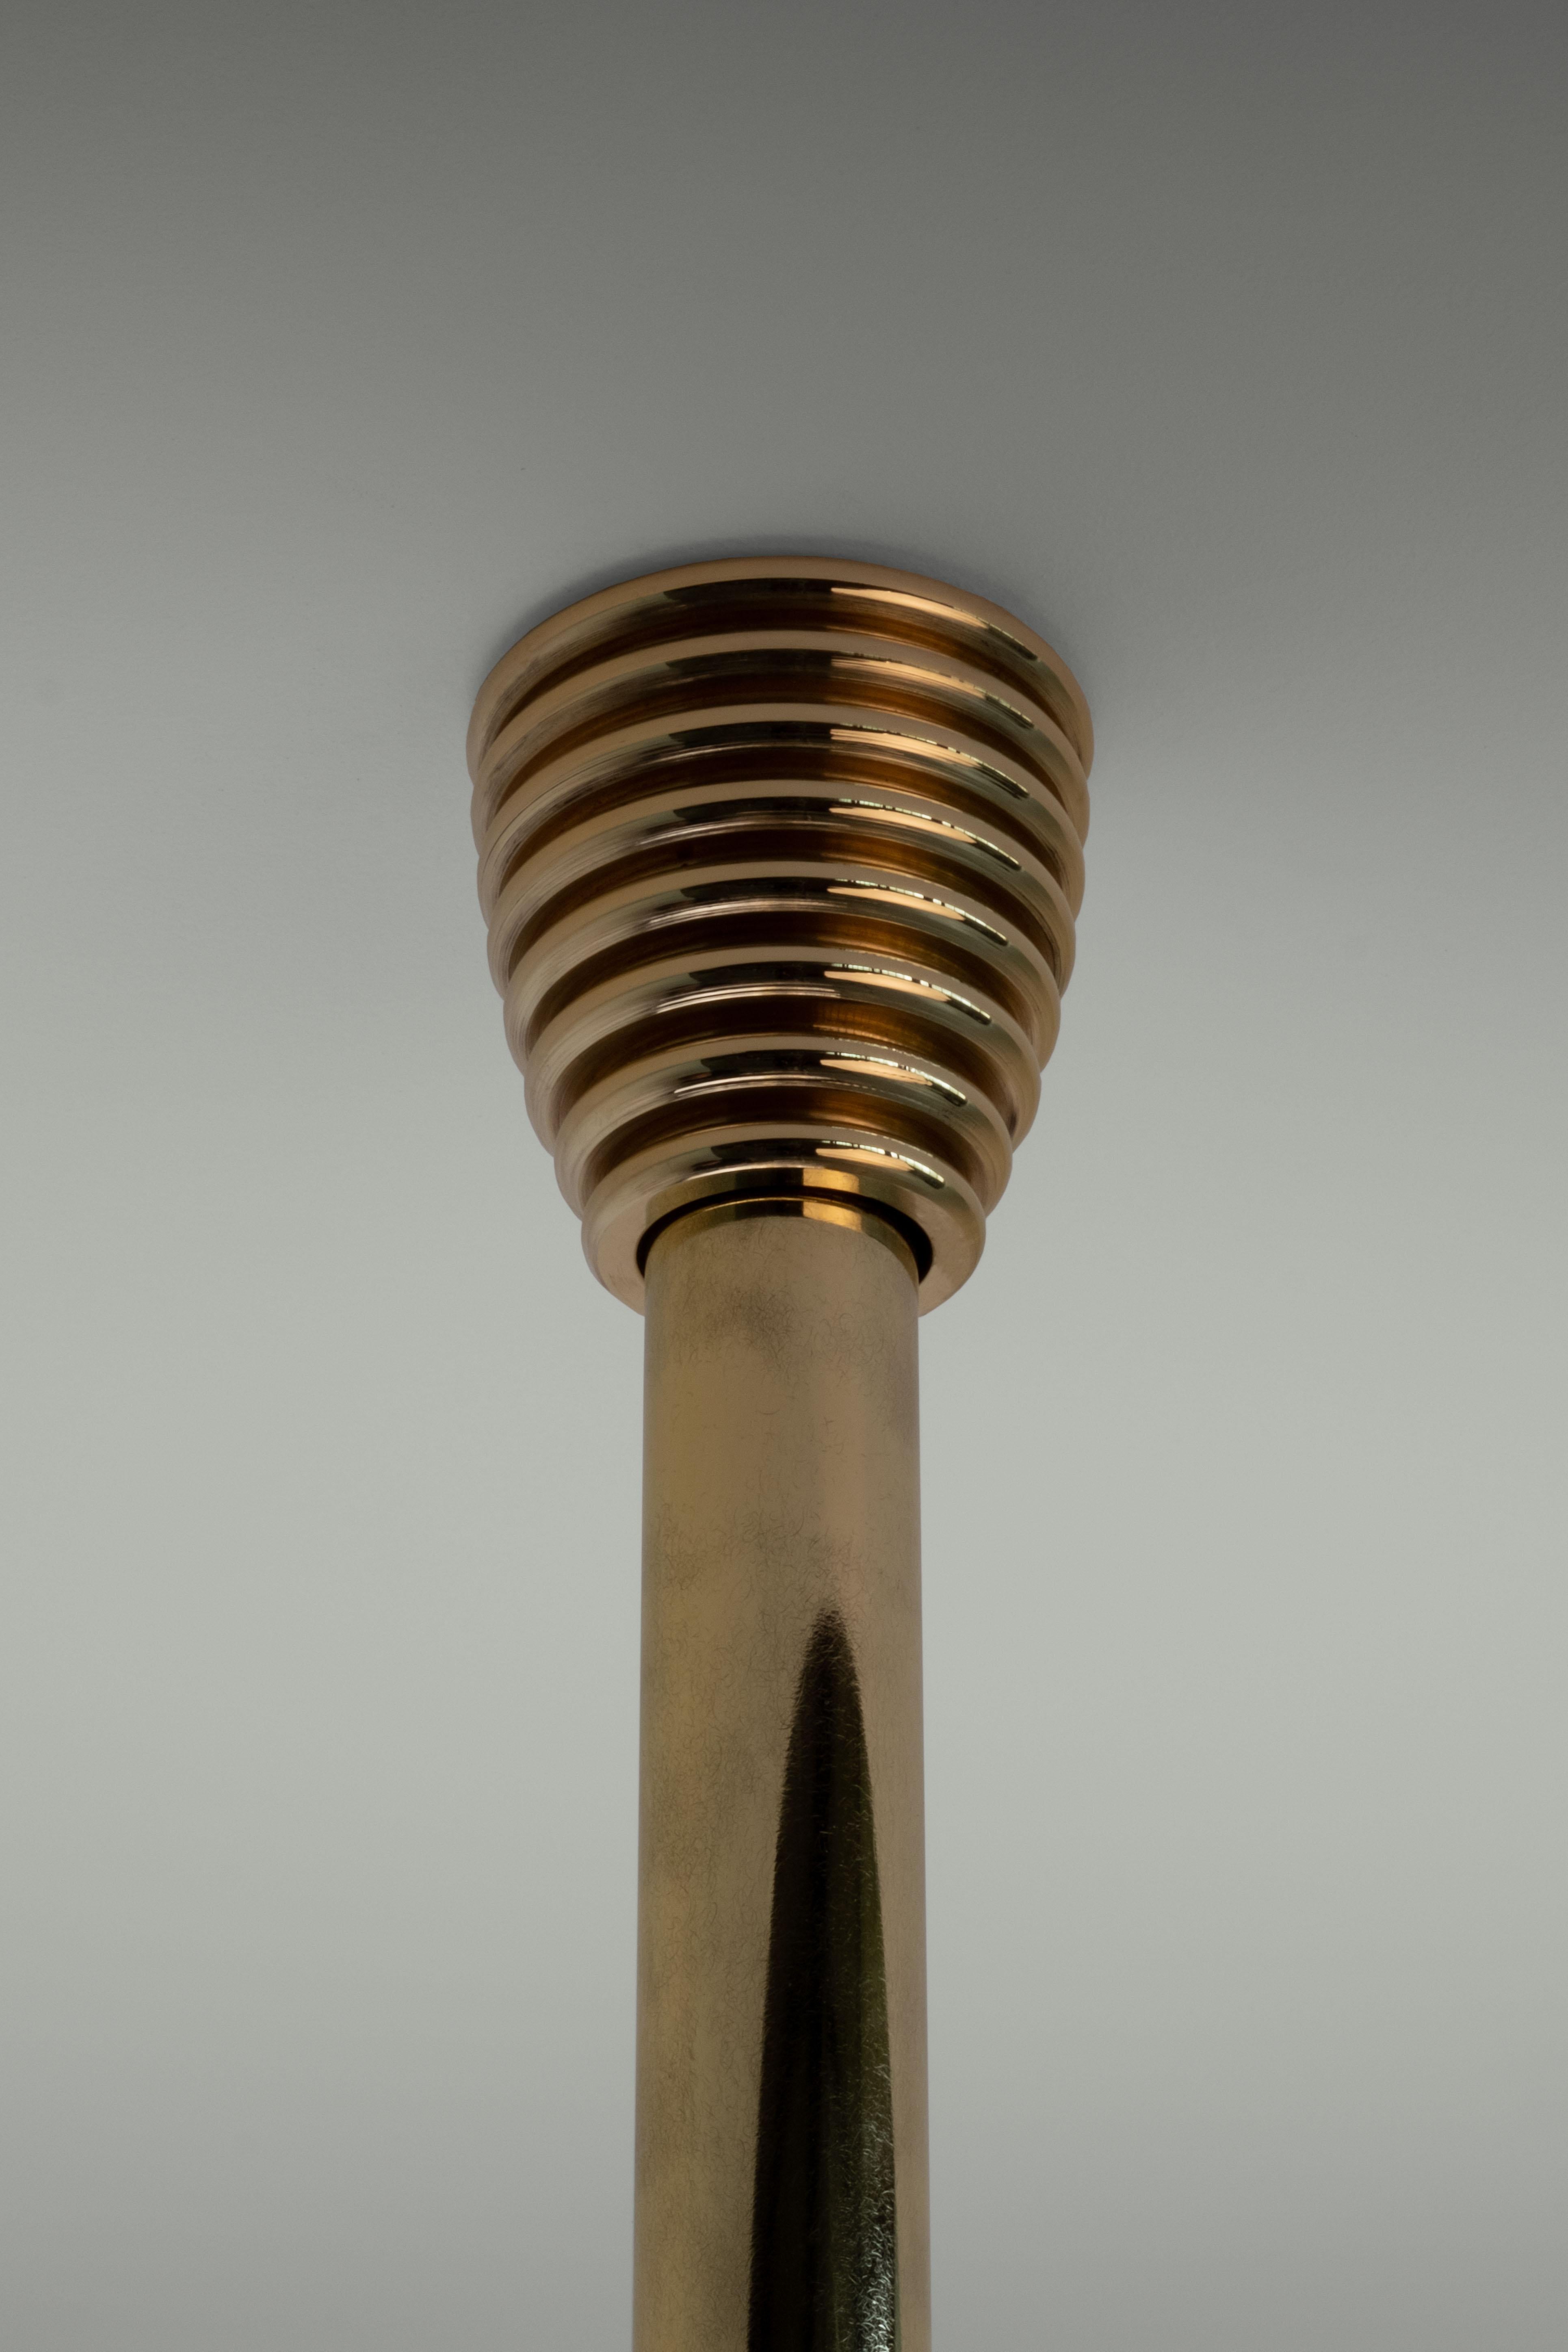 The Insulator 'B' Pendant in polished brass and clear glass by NOVOCASTRIAN deco For Sale 7